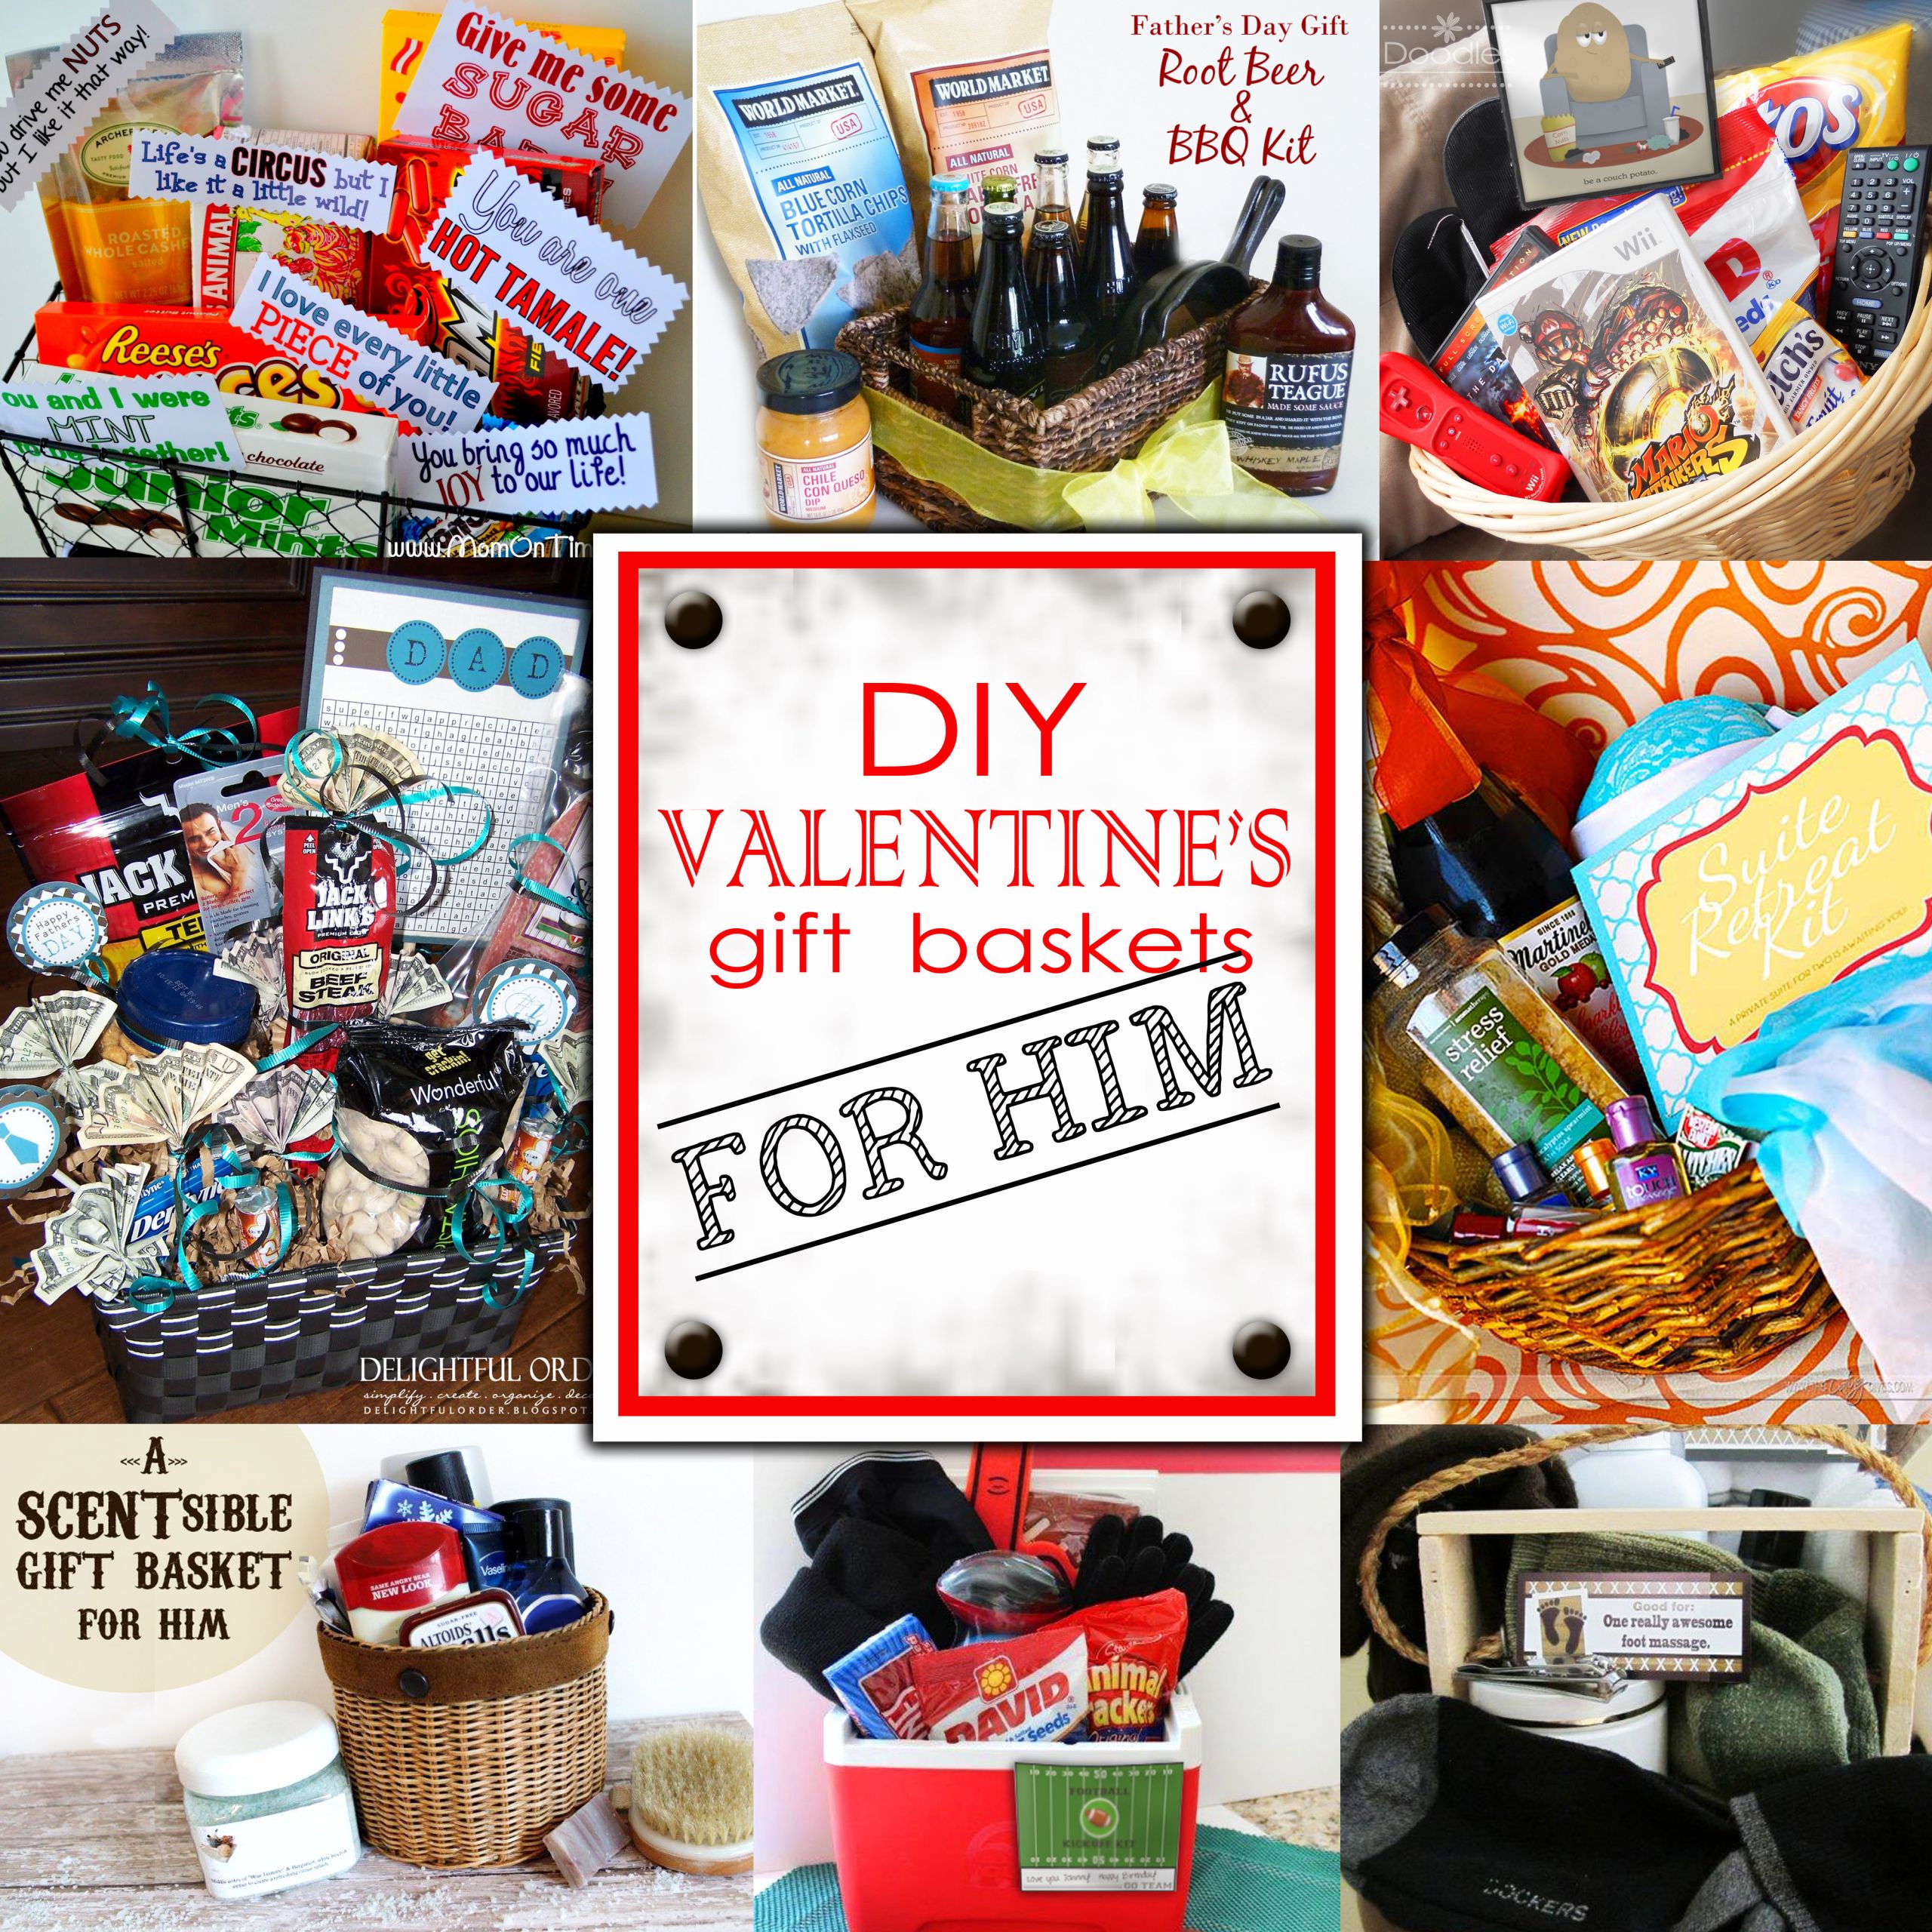 Valentines Day Gifts for Him Homemade Lovely Diy Valentine S Day Gift Baskets for Him Darling Doodles